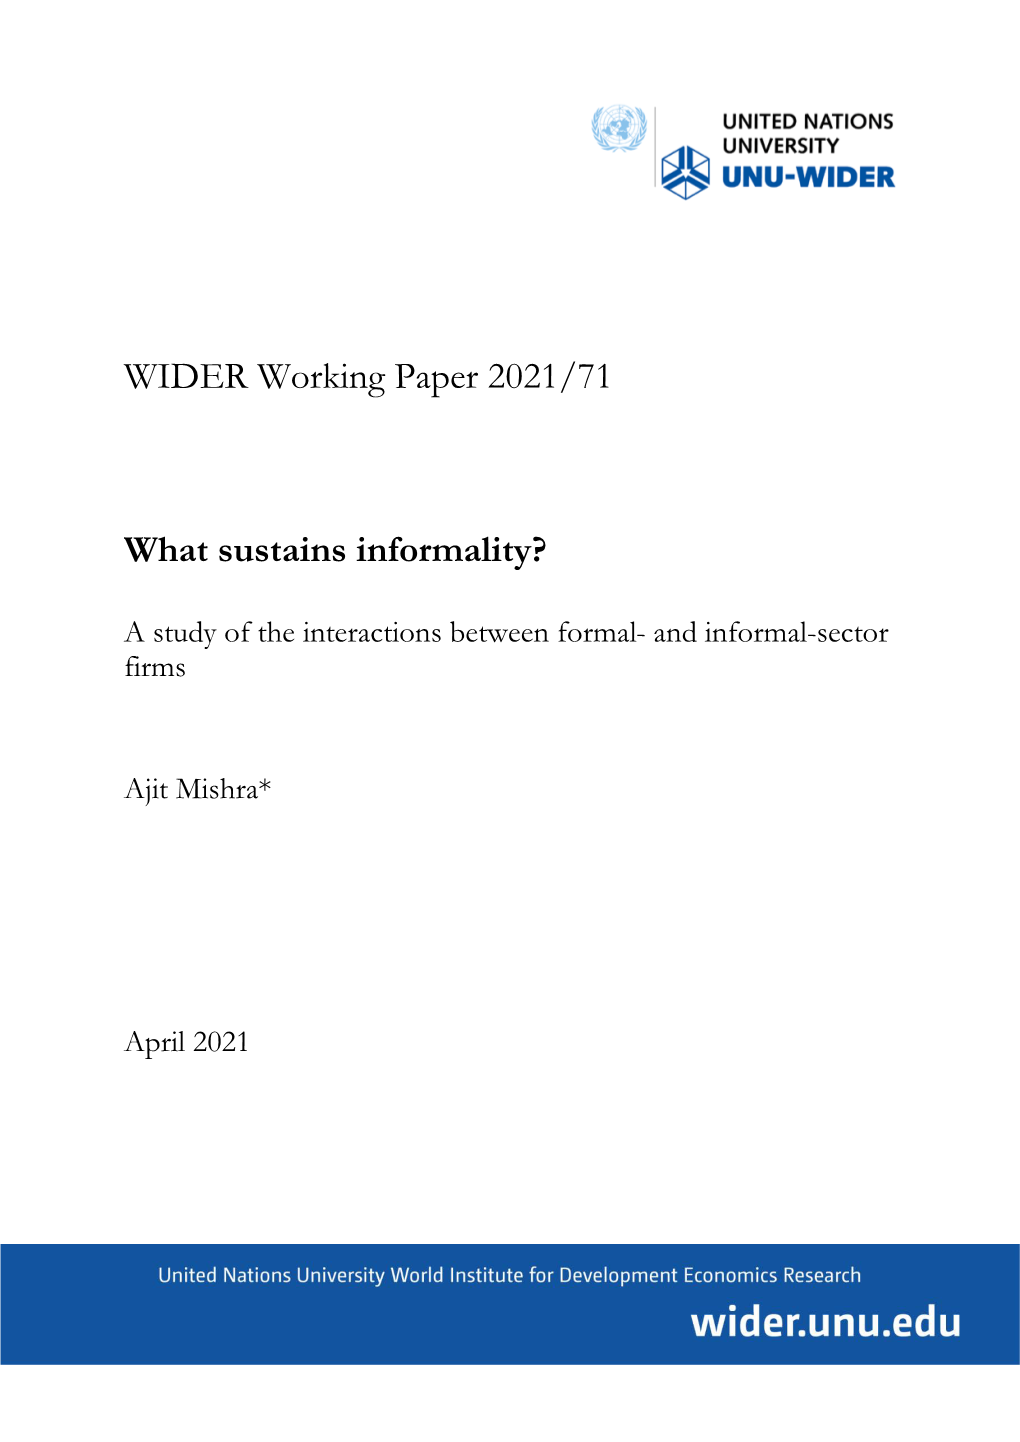 WIDER Working Paper 2021/71-What Sustains Informality? a Study of the Interactions Between Formal- and Informal-Sector Firms